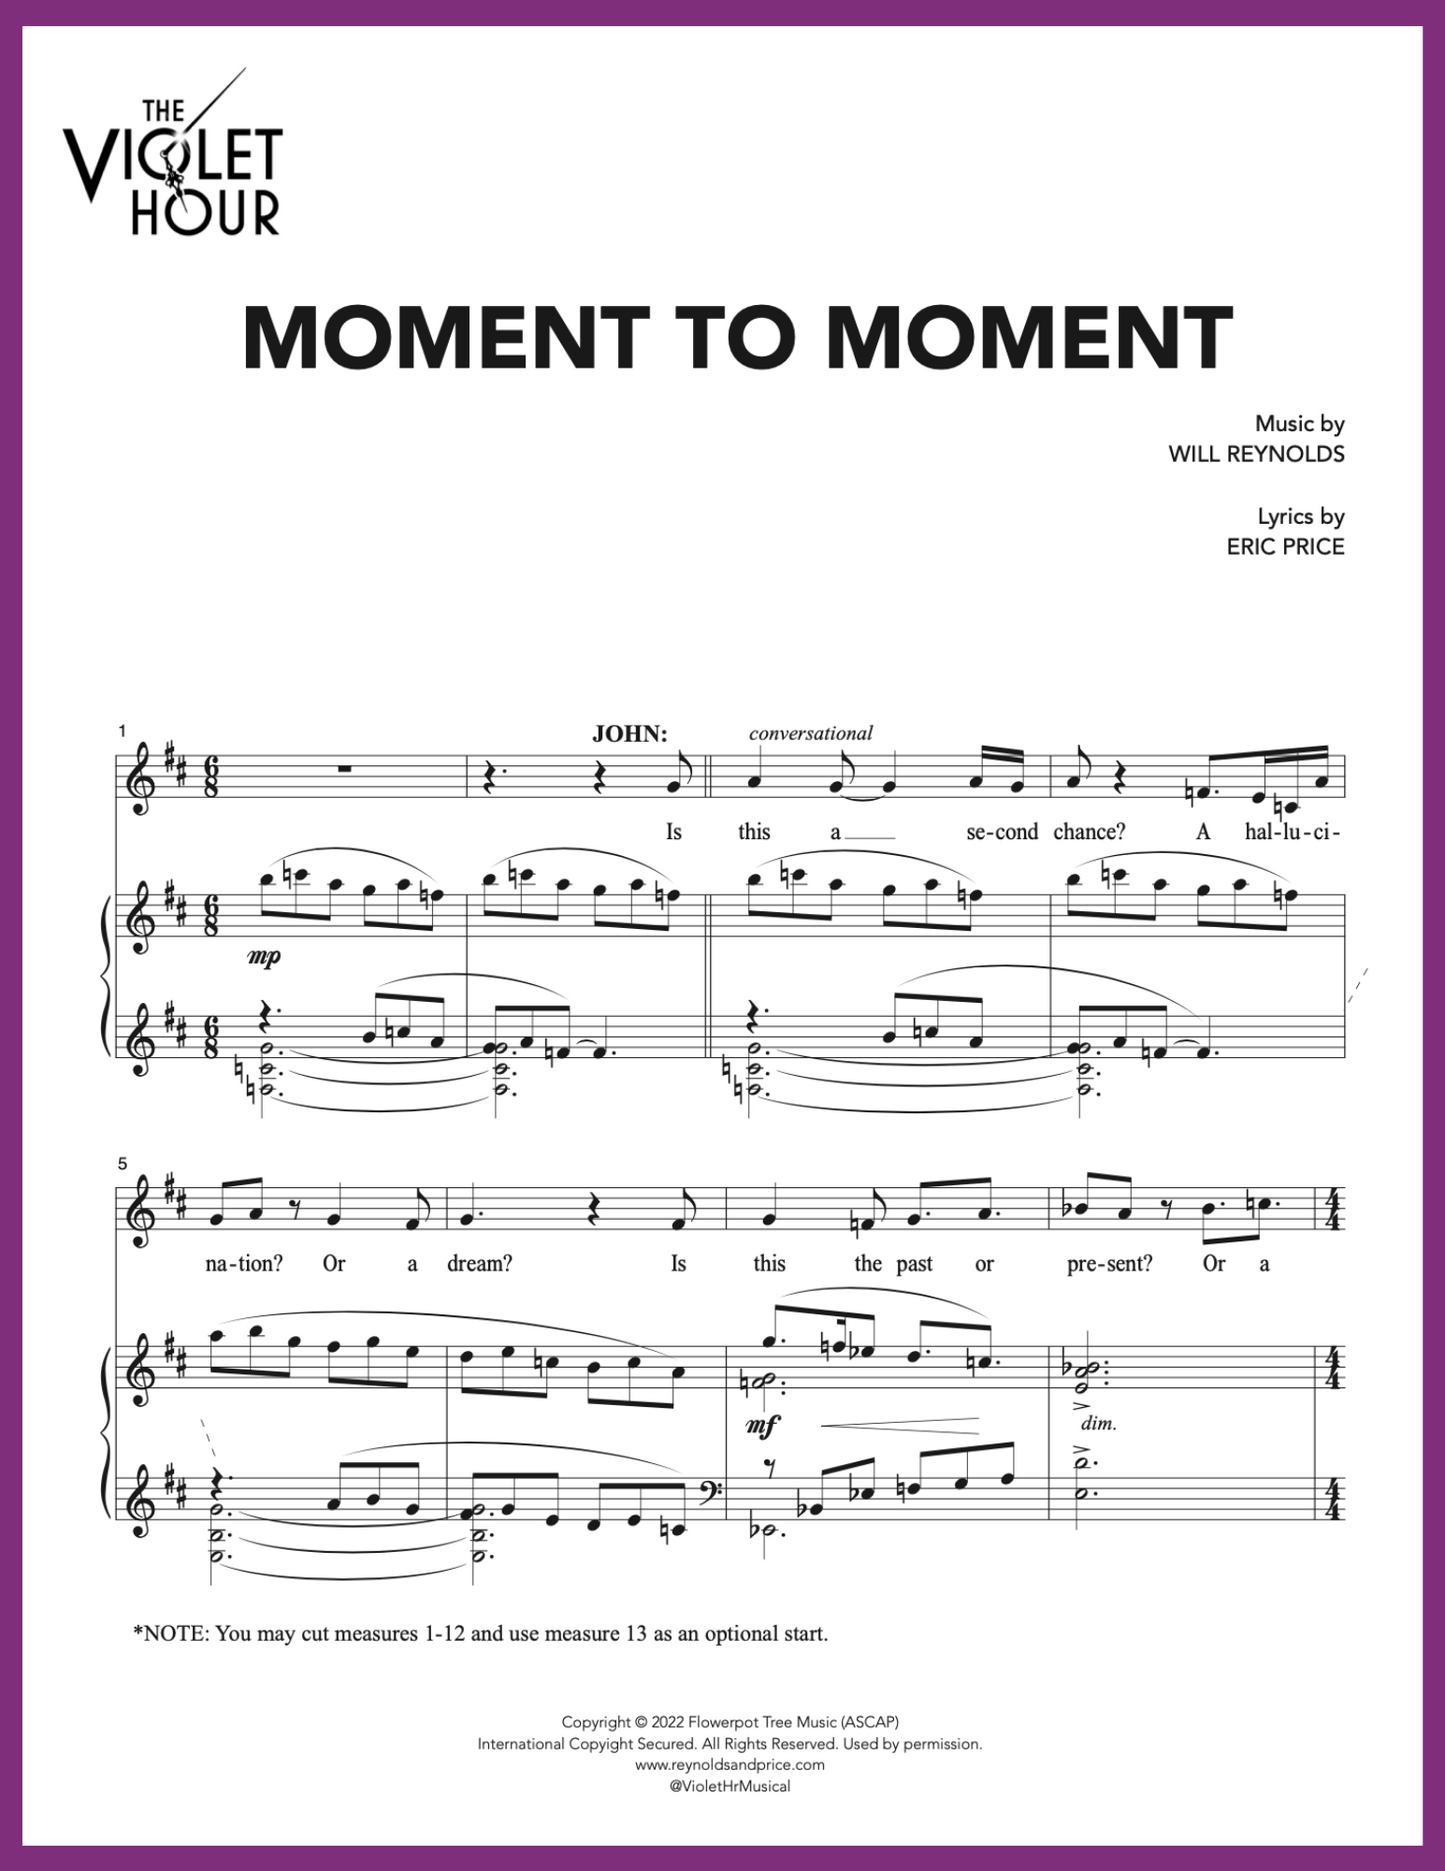 MOMENT TO MOMENT